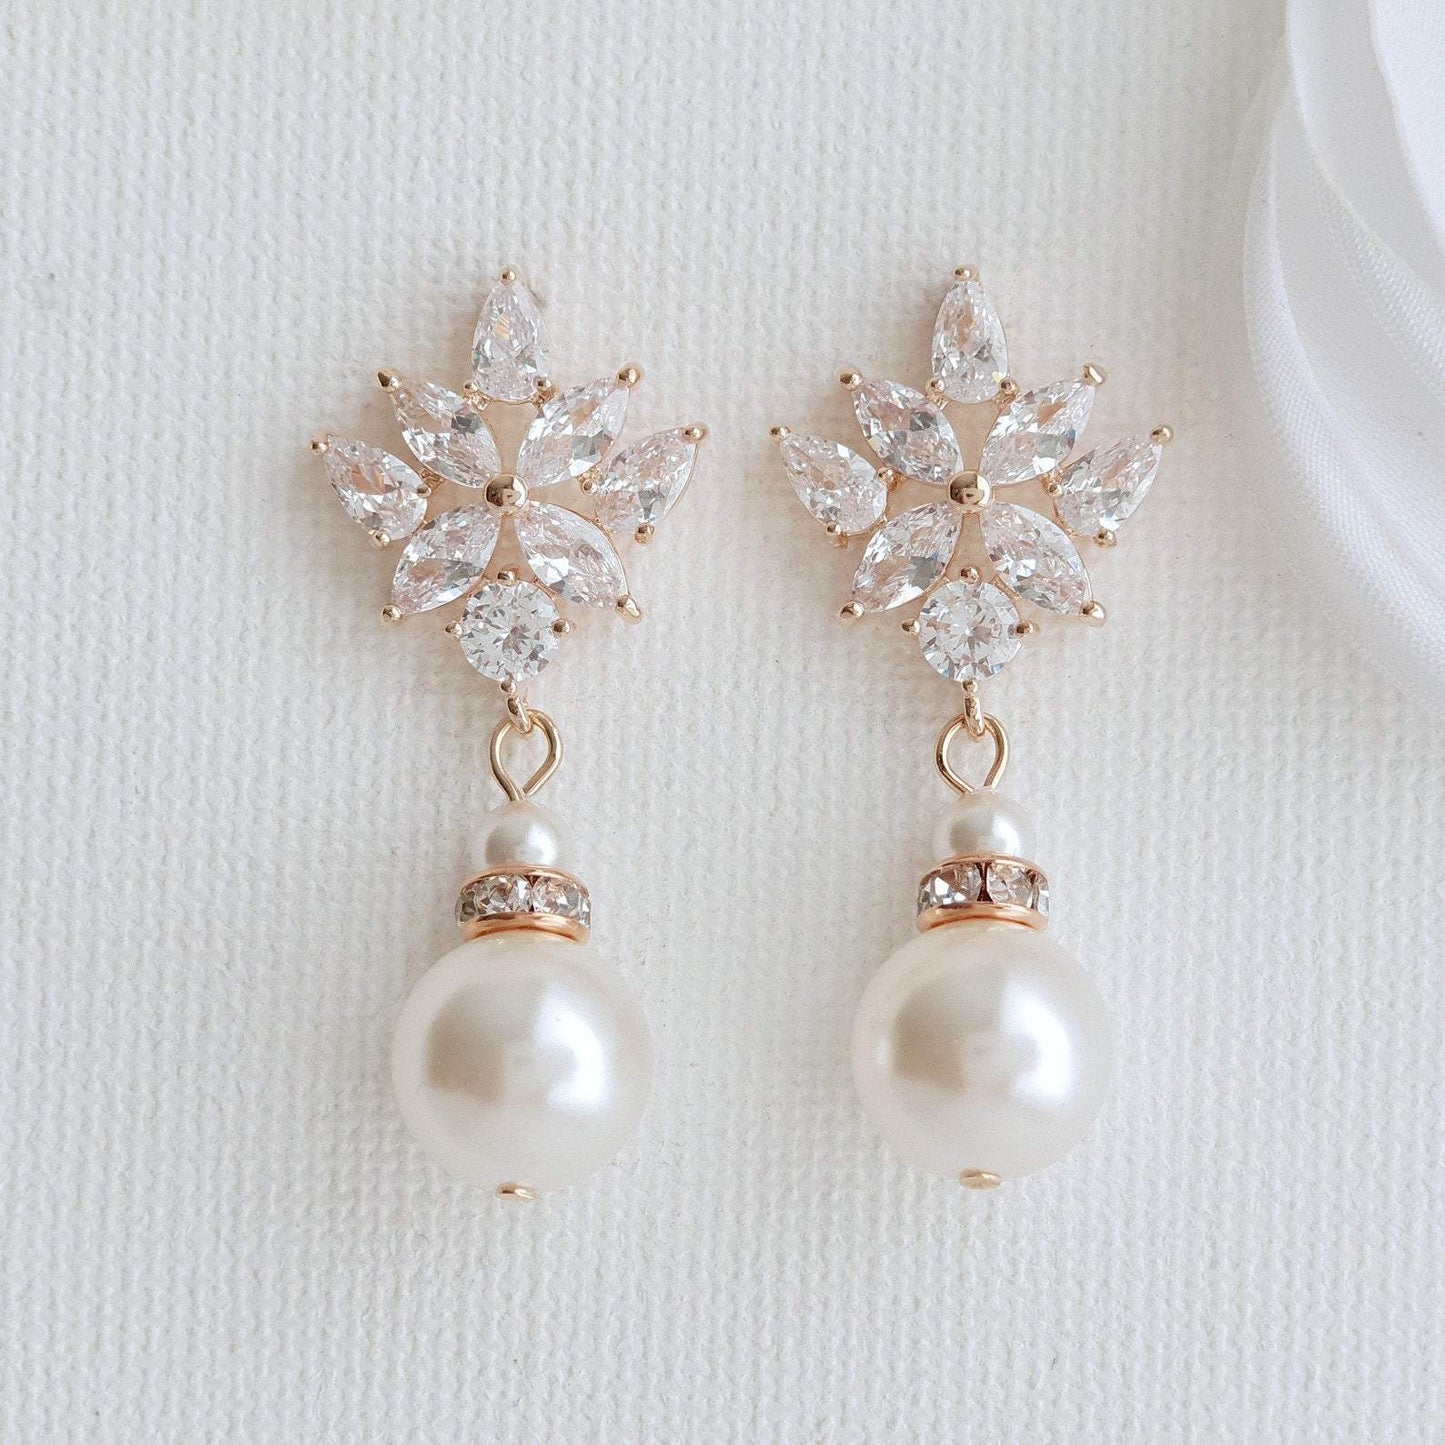 Bridal Earrings with Round Pearl Drops in Silver- Rosa - PoetryDesigns